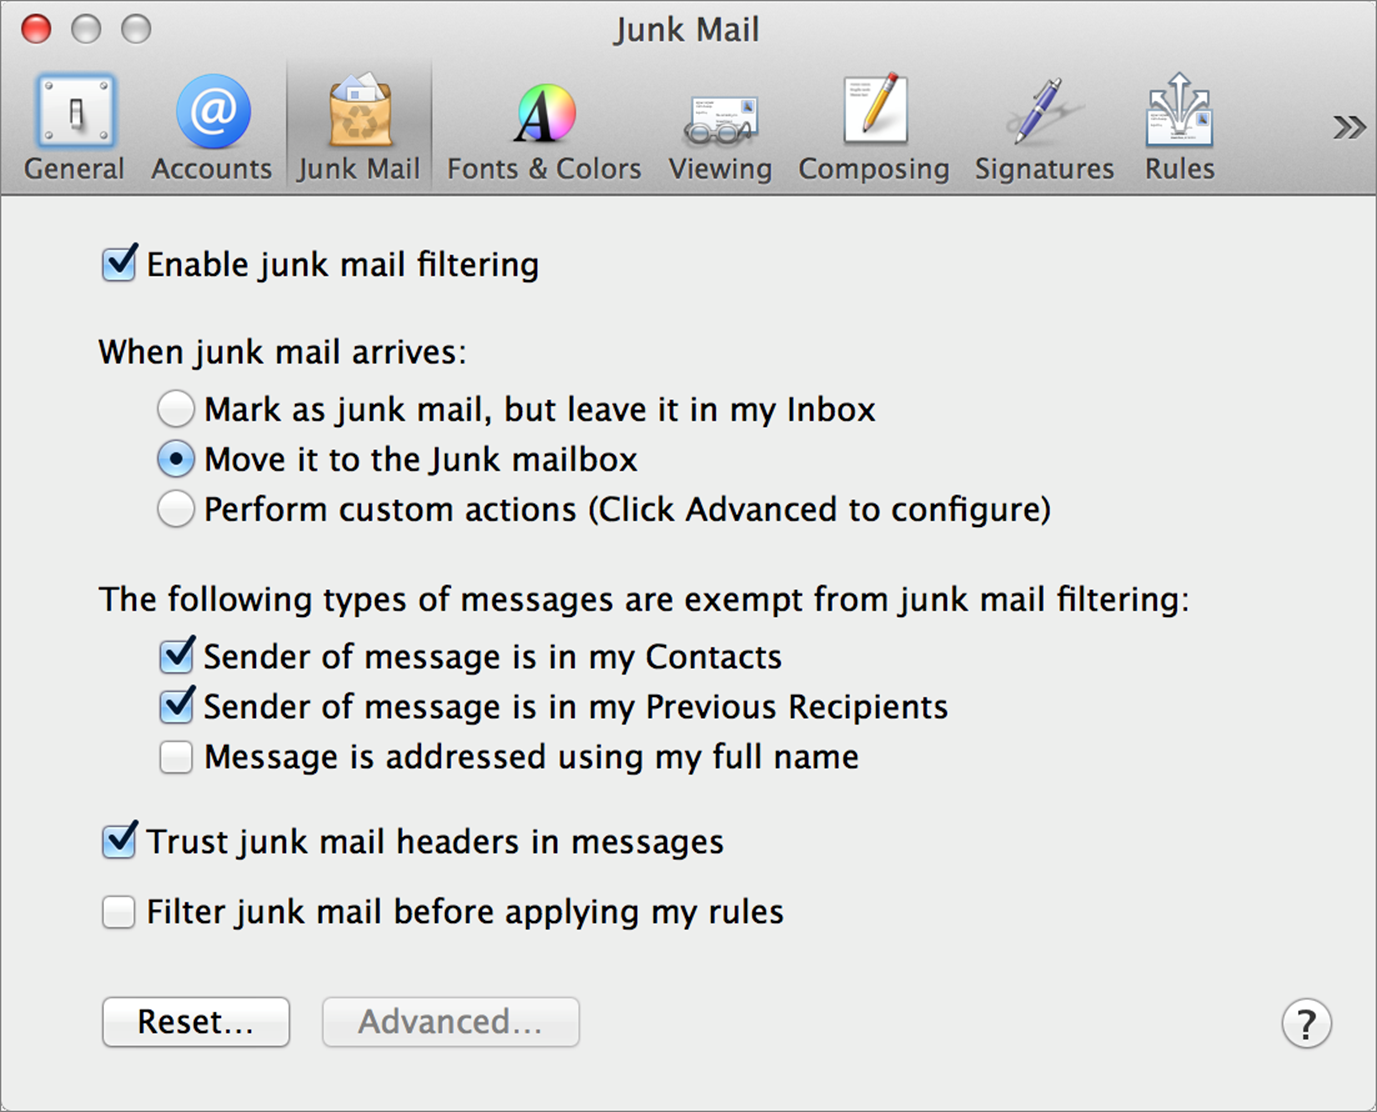 **Figure 17:** These are what I consider to be the optimal Junk Mail settings in Mail.